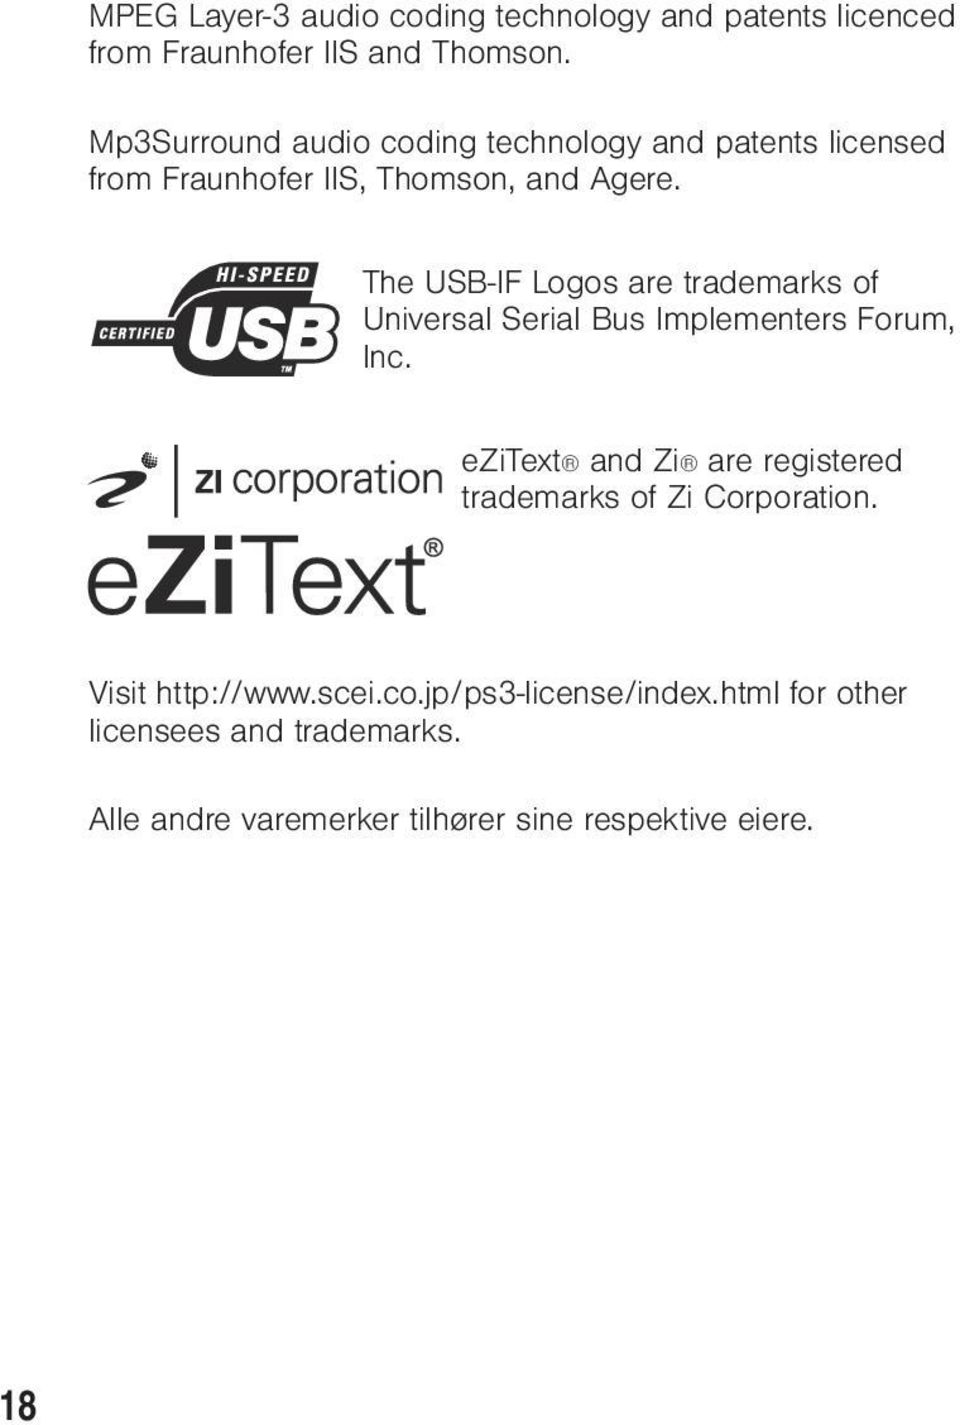 The USB-IF Logos are trademarks of Universal Serial Bus Implementers Forum, Inc.